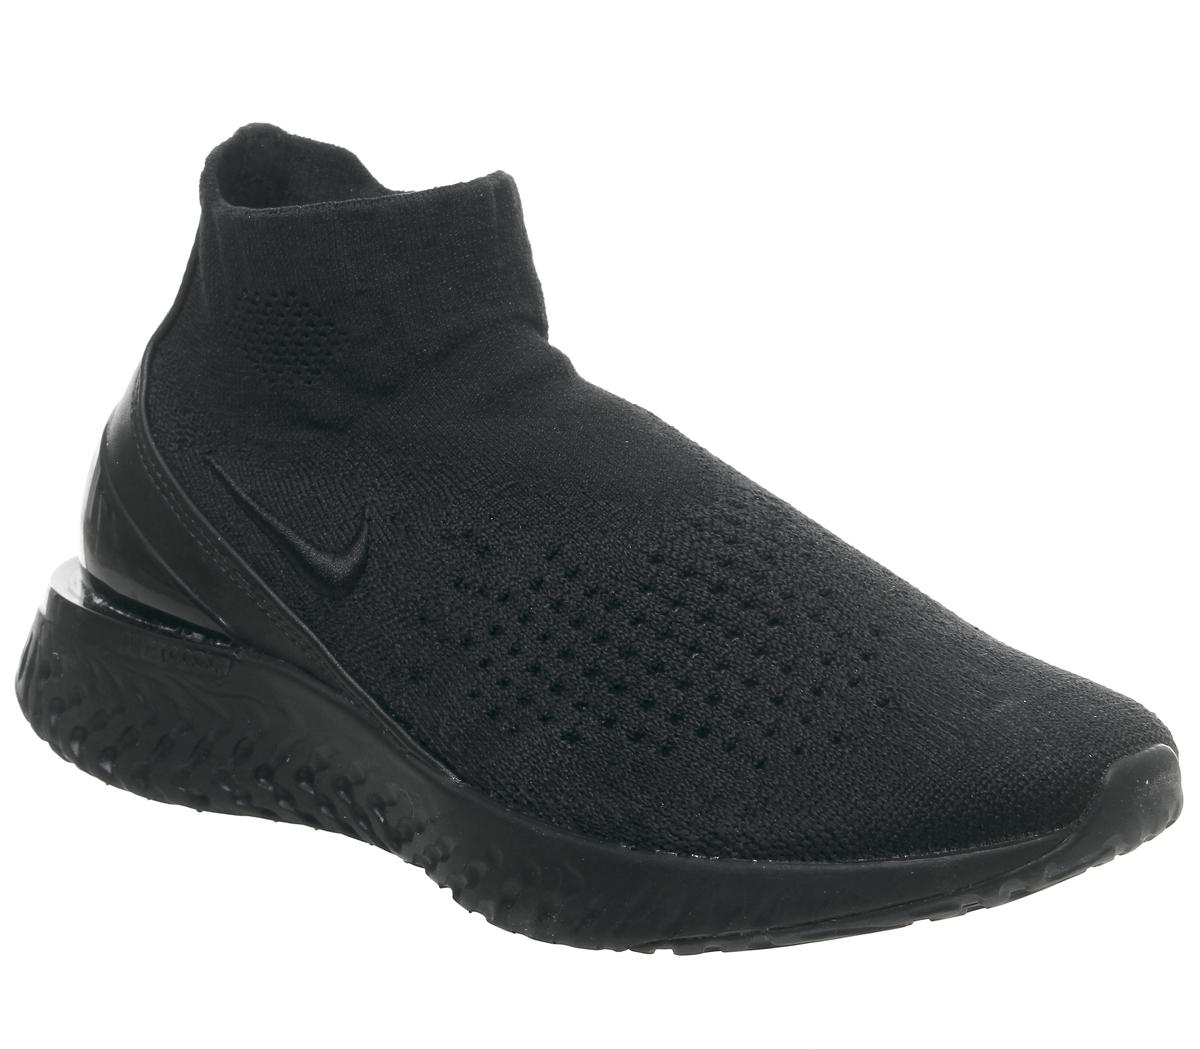 Nike Rise React Flyknit Trainers Black 